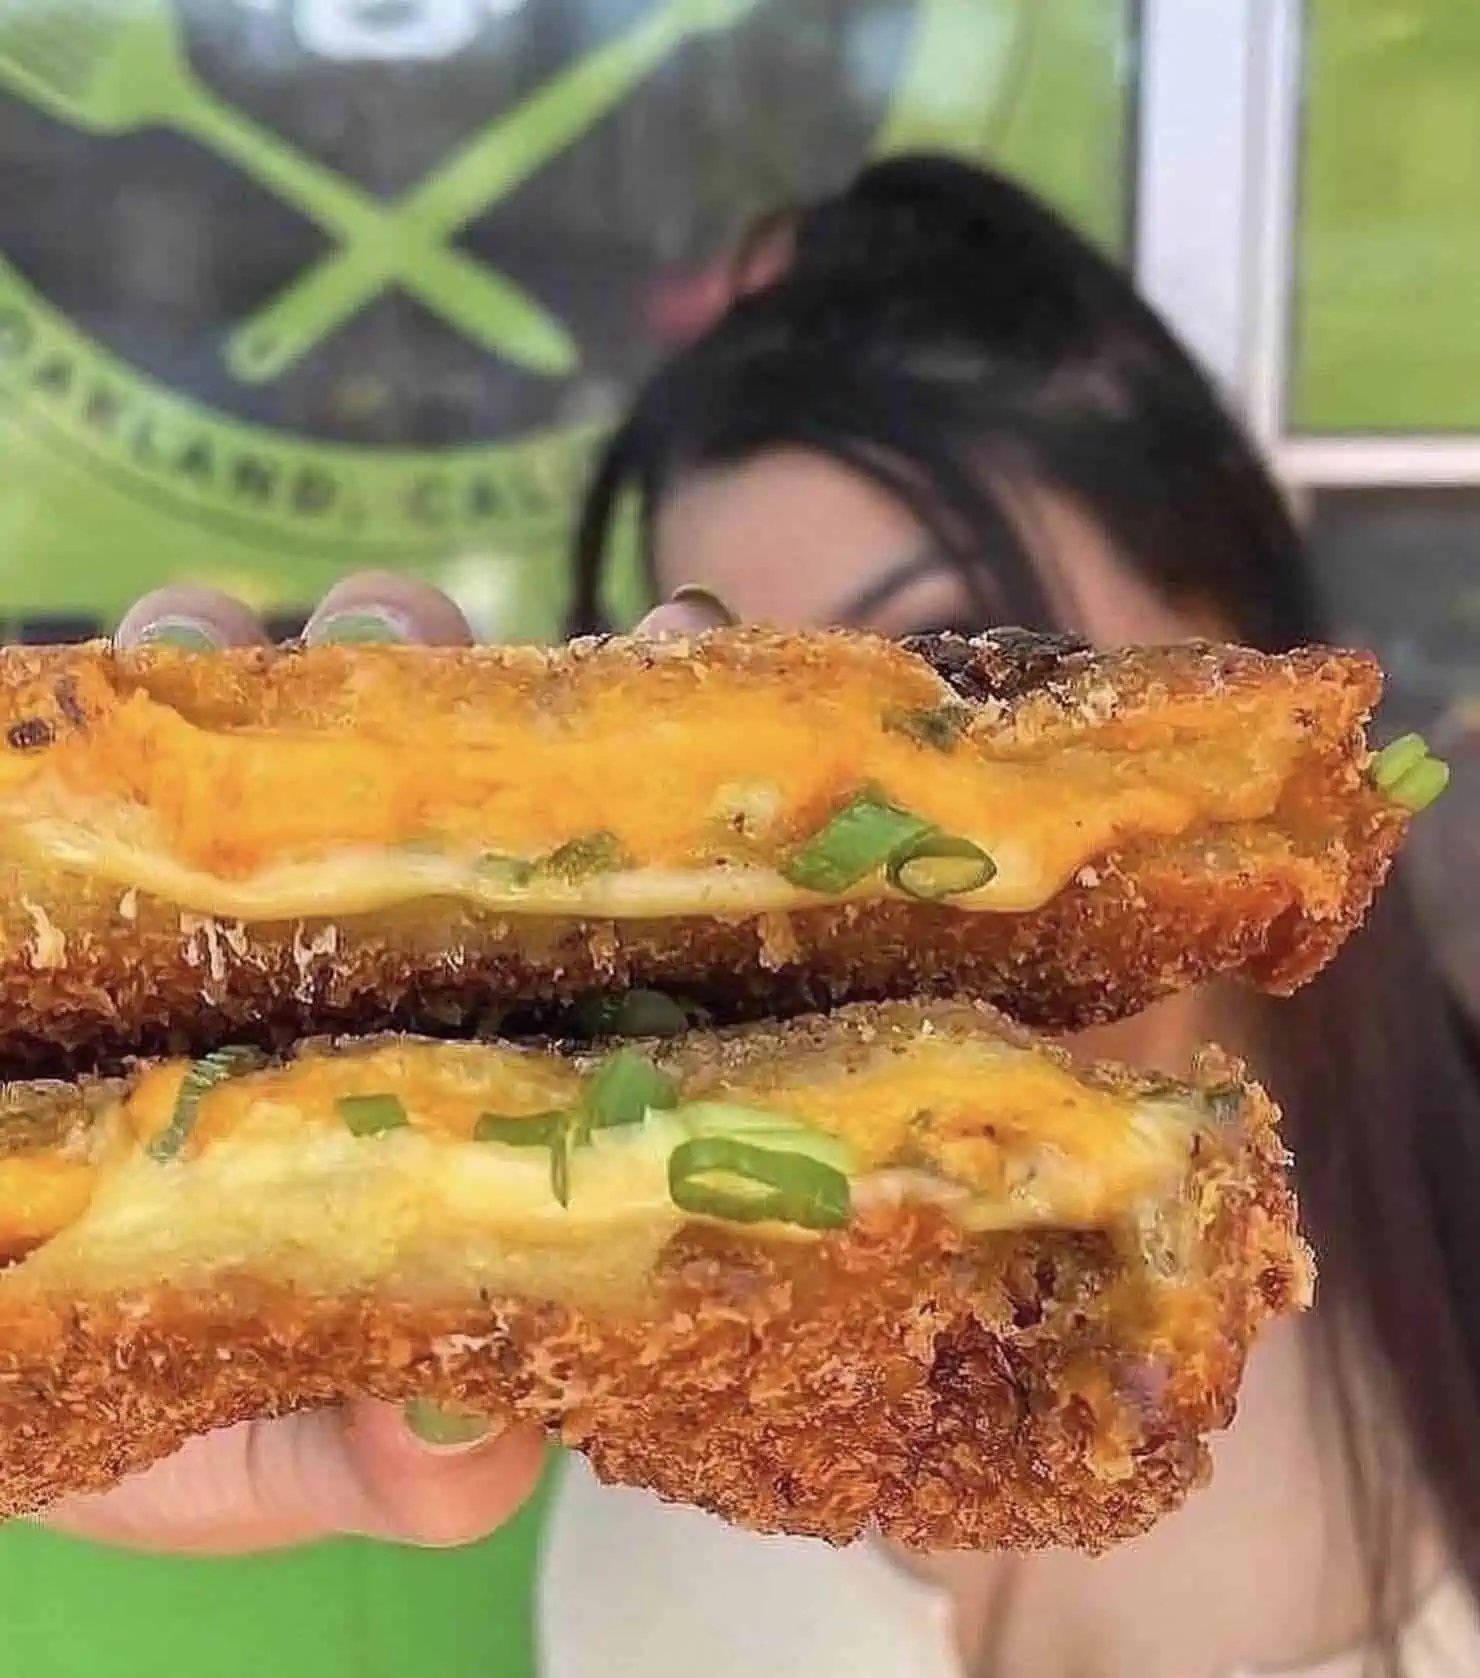 A vegan fried chicken and grilled cheese sandwich from Vegan Mob restaurant in San Francisco.